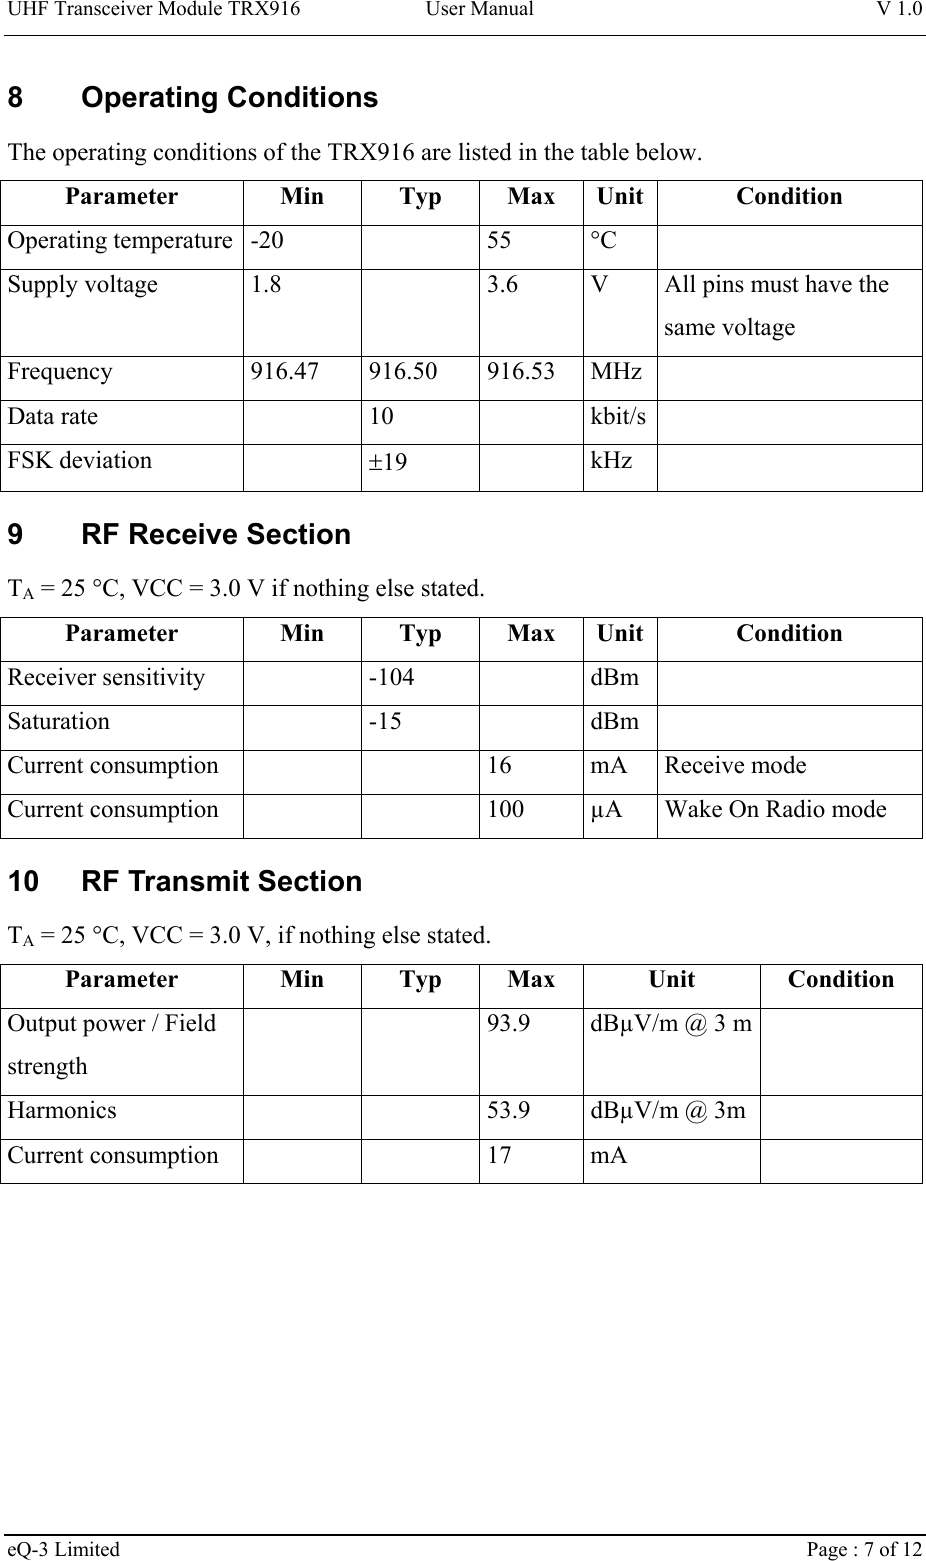 UHF Transceiver Module TRX916 User Manual  V 1.0 eQ-3 Limited    Page : 7 of 12 8 Operating Conditions The operating conditions of the TRX916 are listed in the table below. Parameter Min Typ Max Unit Condition Operating temperature  -20    55  °C   Supply voltage  1.8    3.6  V  All pins must have the same voltage Frequency 916.47 916.50 916.53 MHz  Data rate    10    kbit/s  FSK deviation    ±19   kHz  9  RF Receive Section TA = 25 °C, VCC = 3.0 V if nothing else stated. Parameter Min Typ Max Unit Condition Receiver sensitivity    -104    dBm   Saturation  -15  dBm  Current consumption      16  mA  Receive mode Current consumption      100  µA  Wake On Radio mode 10  RF Transmit Section TA = 25 °C, VCC = 3.0 V, if nothing else stated. Parameter Min Typ Max Unit Condition Output power / Field strength     93.9  dBµV/m @ 3 m   Harmonics   53.9 dBµV/m @ 3m  Current consumption      17  mA   